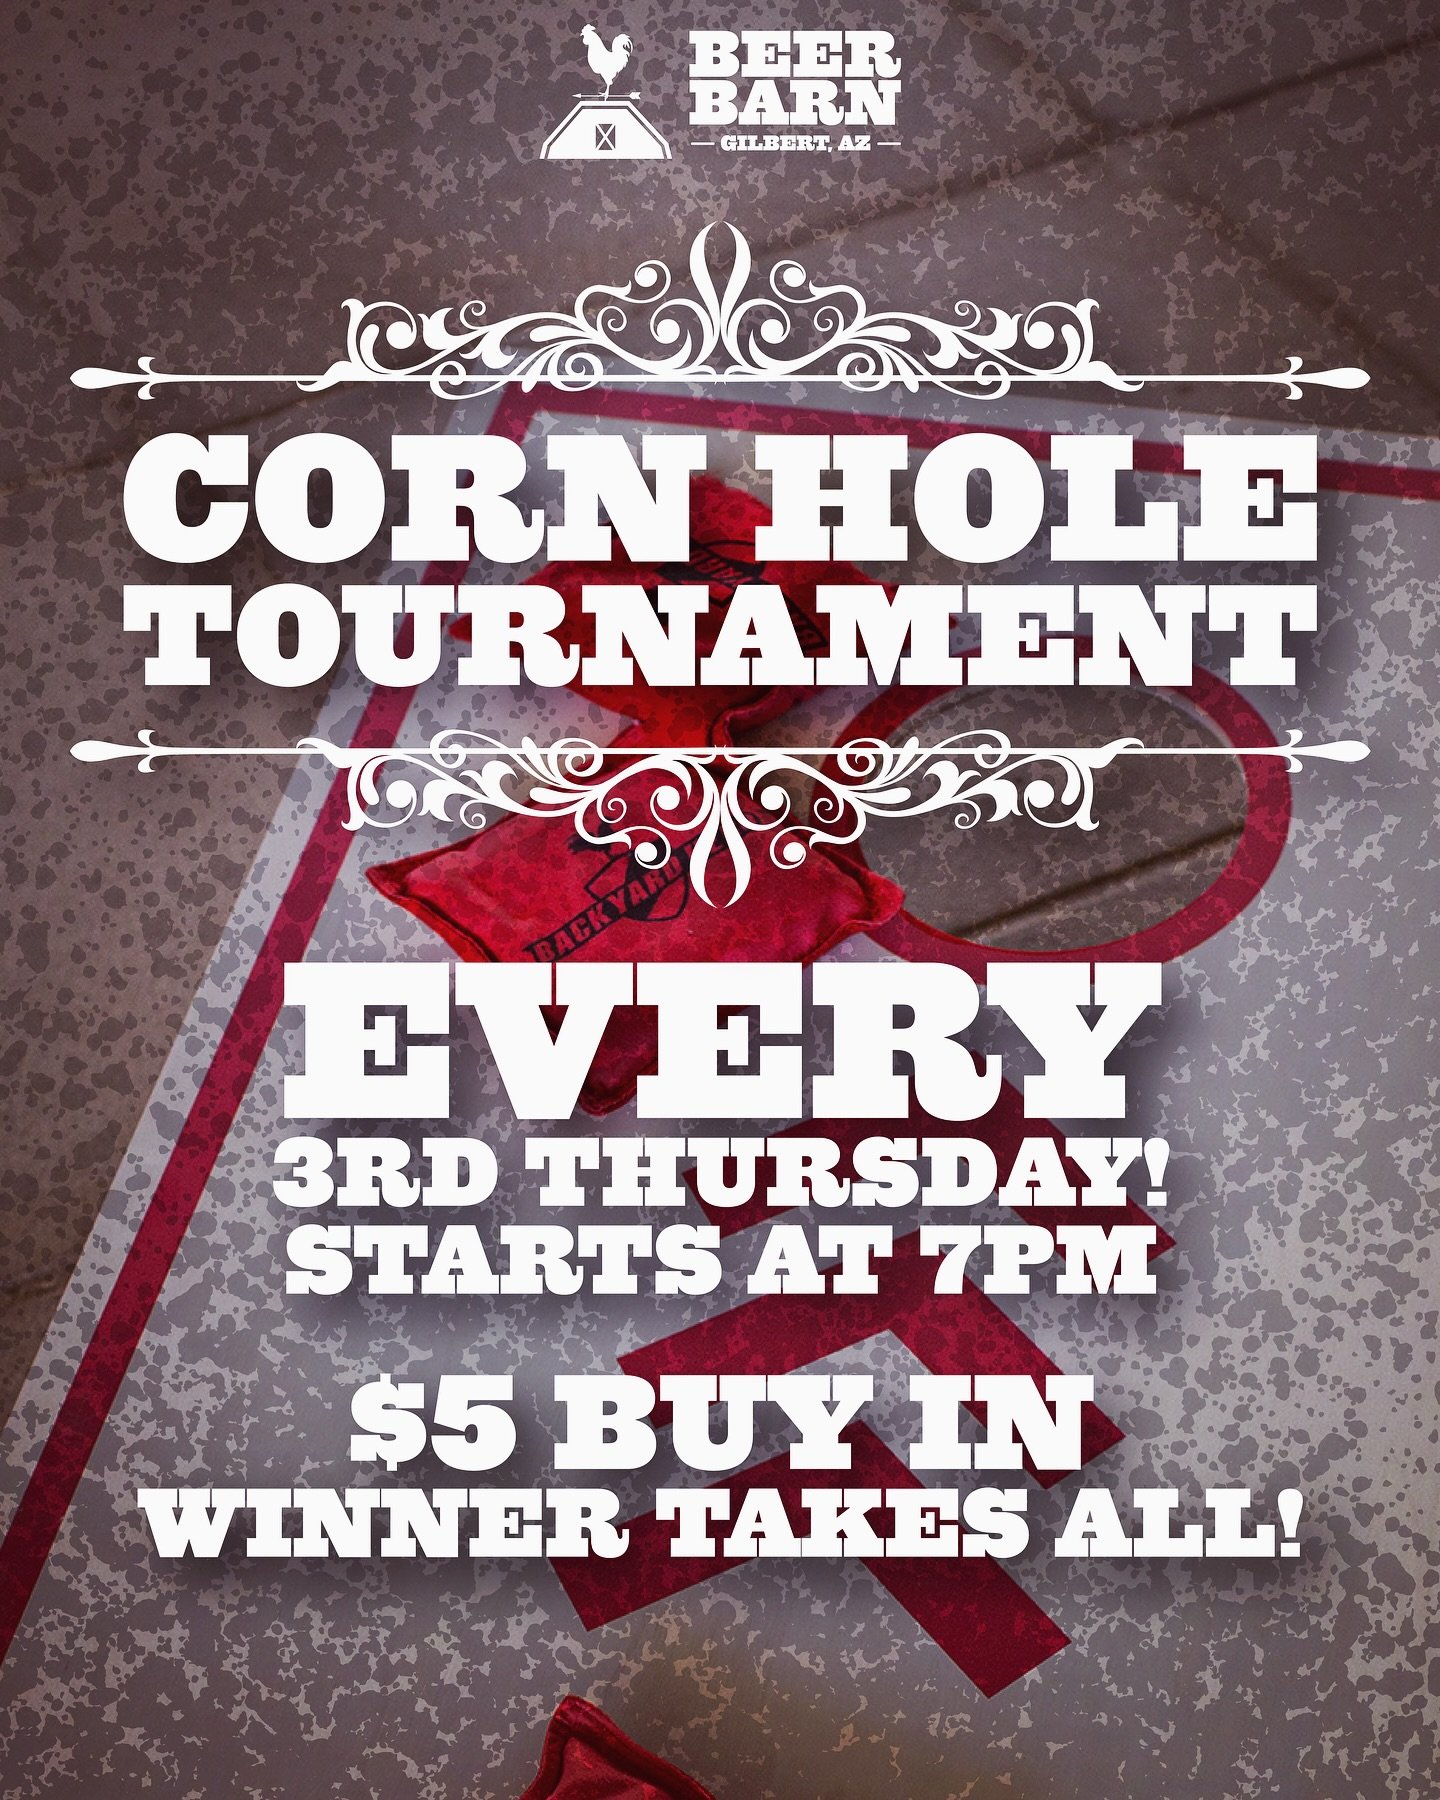 CALLIN ALL CORN HOLE CONTENDERS

Tonight&rsquo;s the night! Every 3rd Thursday of the month, we host a corn hole tourney! $5 buy in, winner takes all! The competition will start at 7pm, so don&rsquo;t be late. Let&rsquo;s find out if you&rsquo;ve got